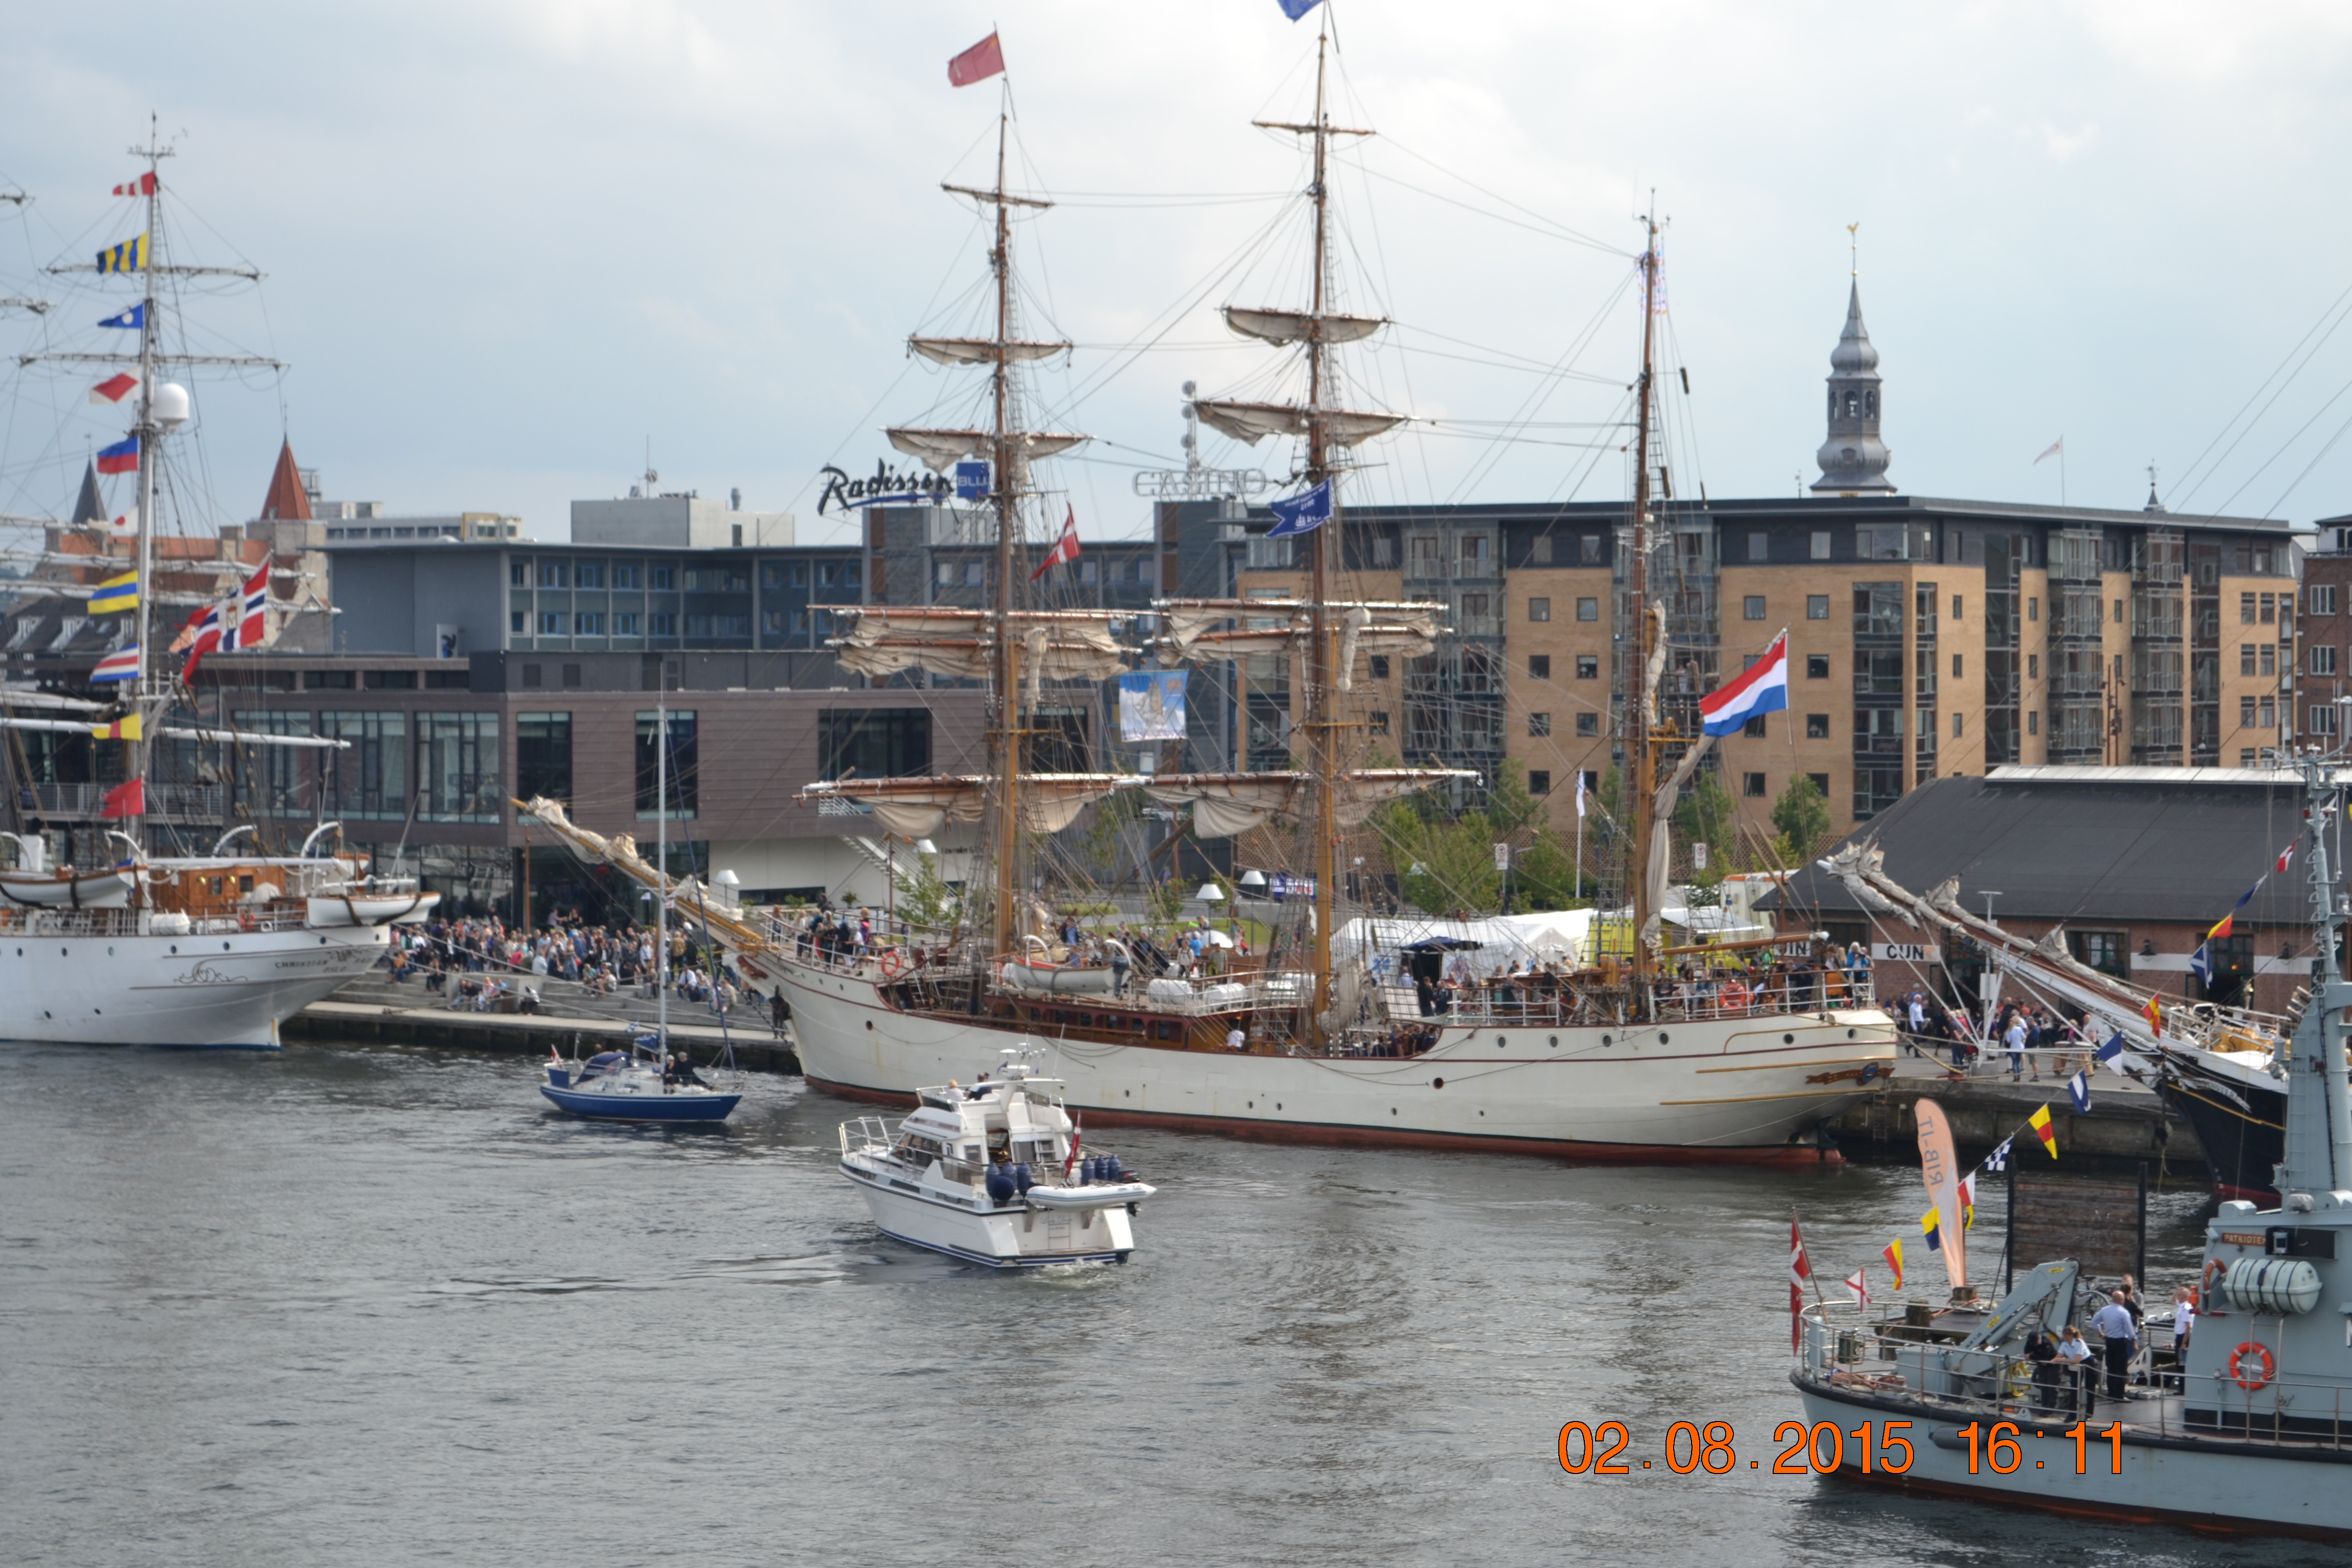 The Tall Ships Races 2015